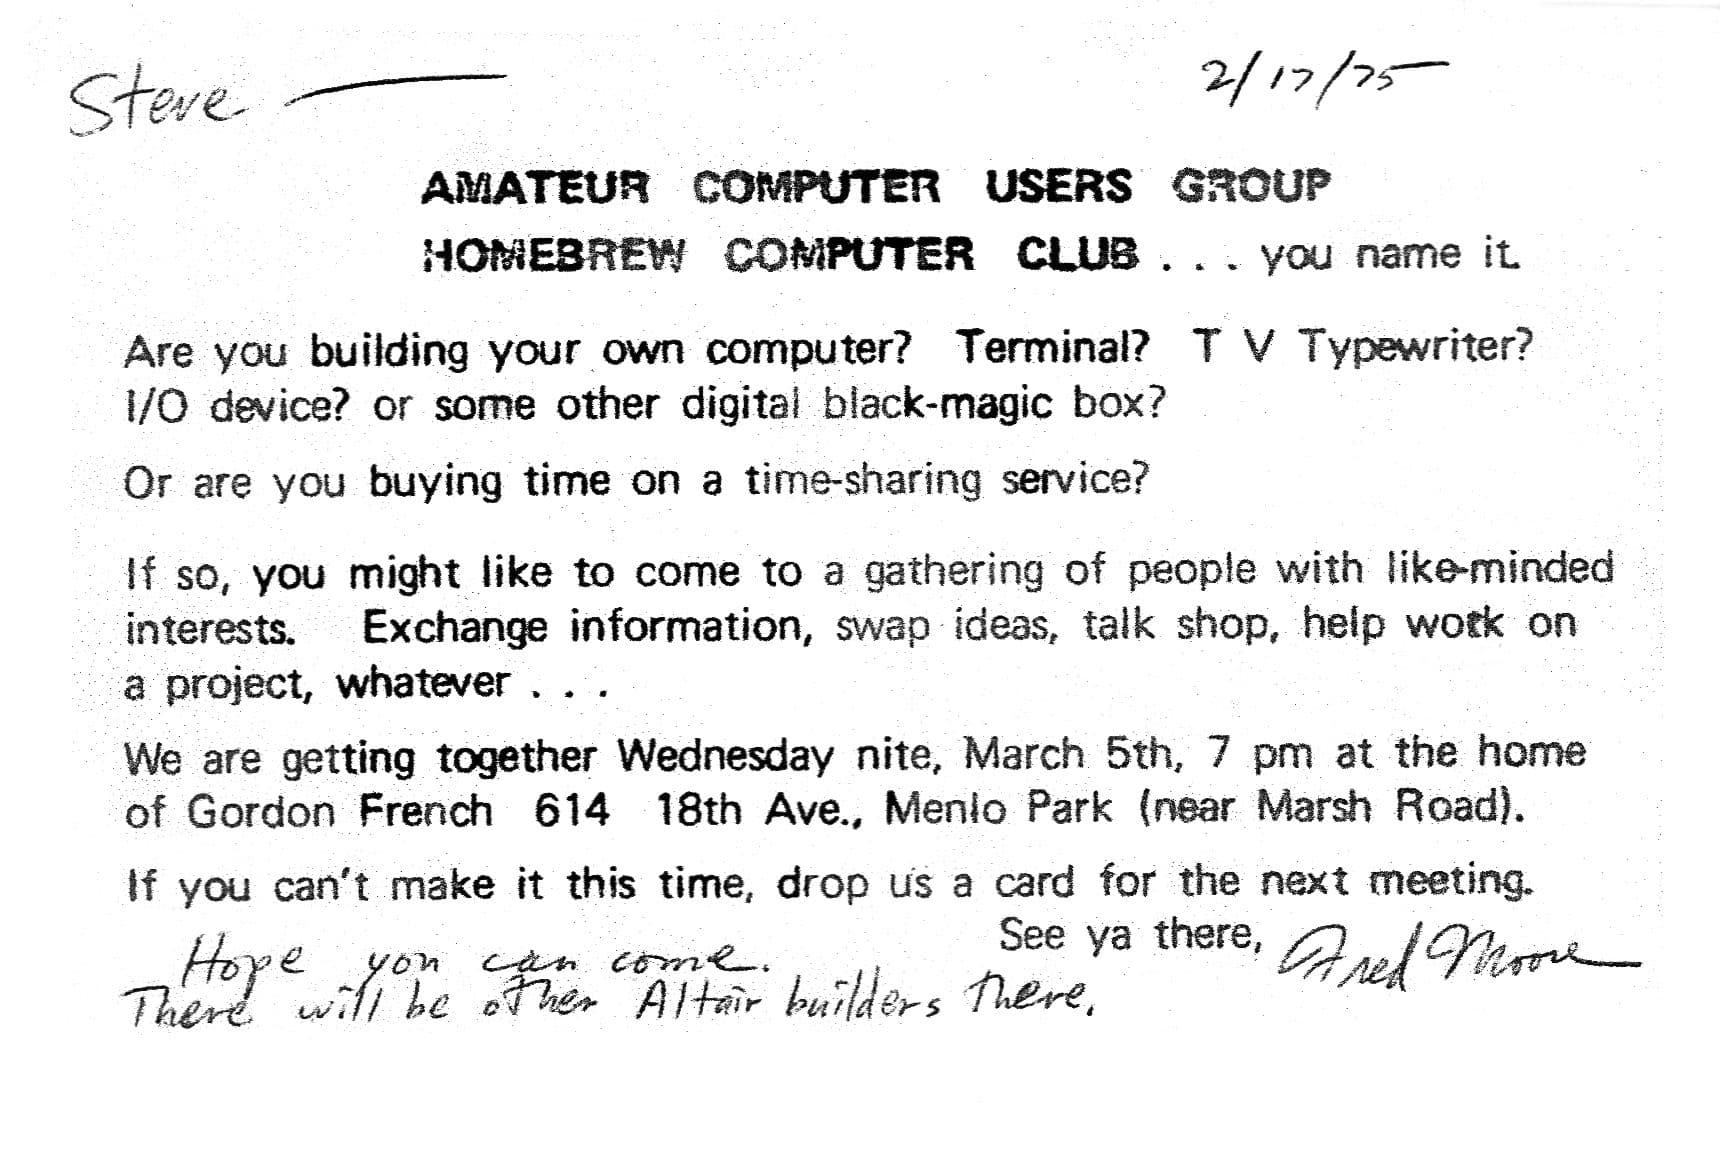 Copy of a postcard invitation to the first Homebrew Computer Club meeting